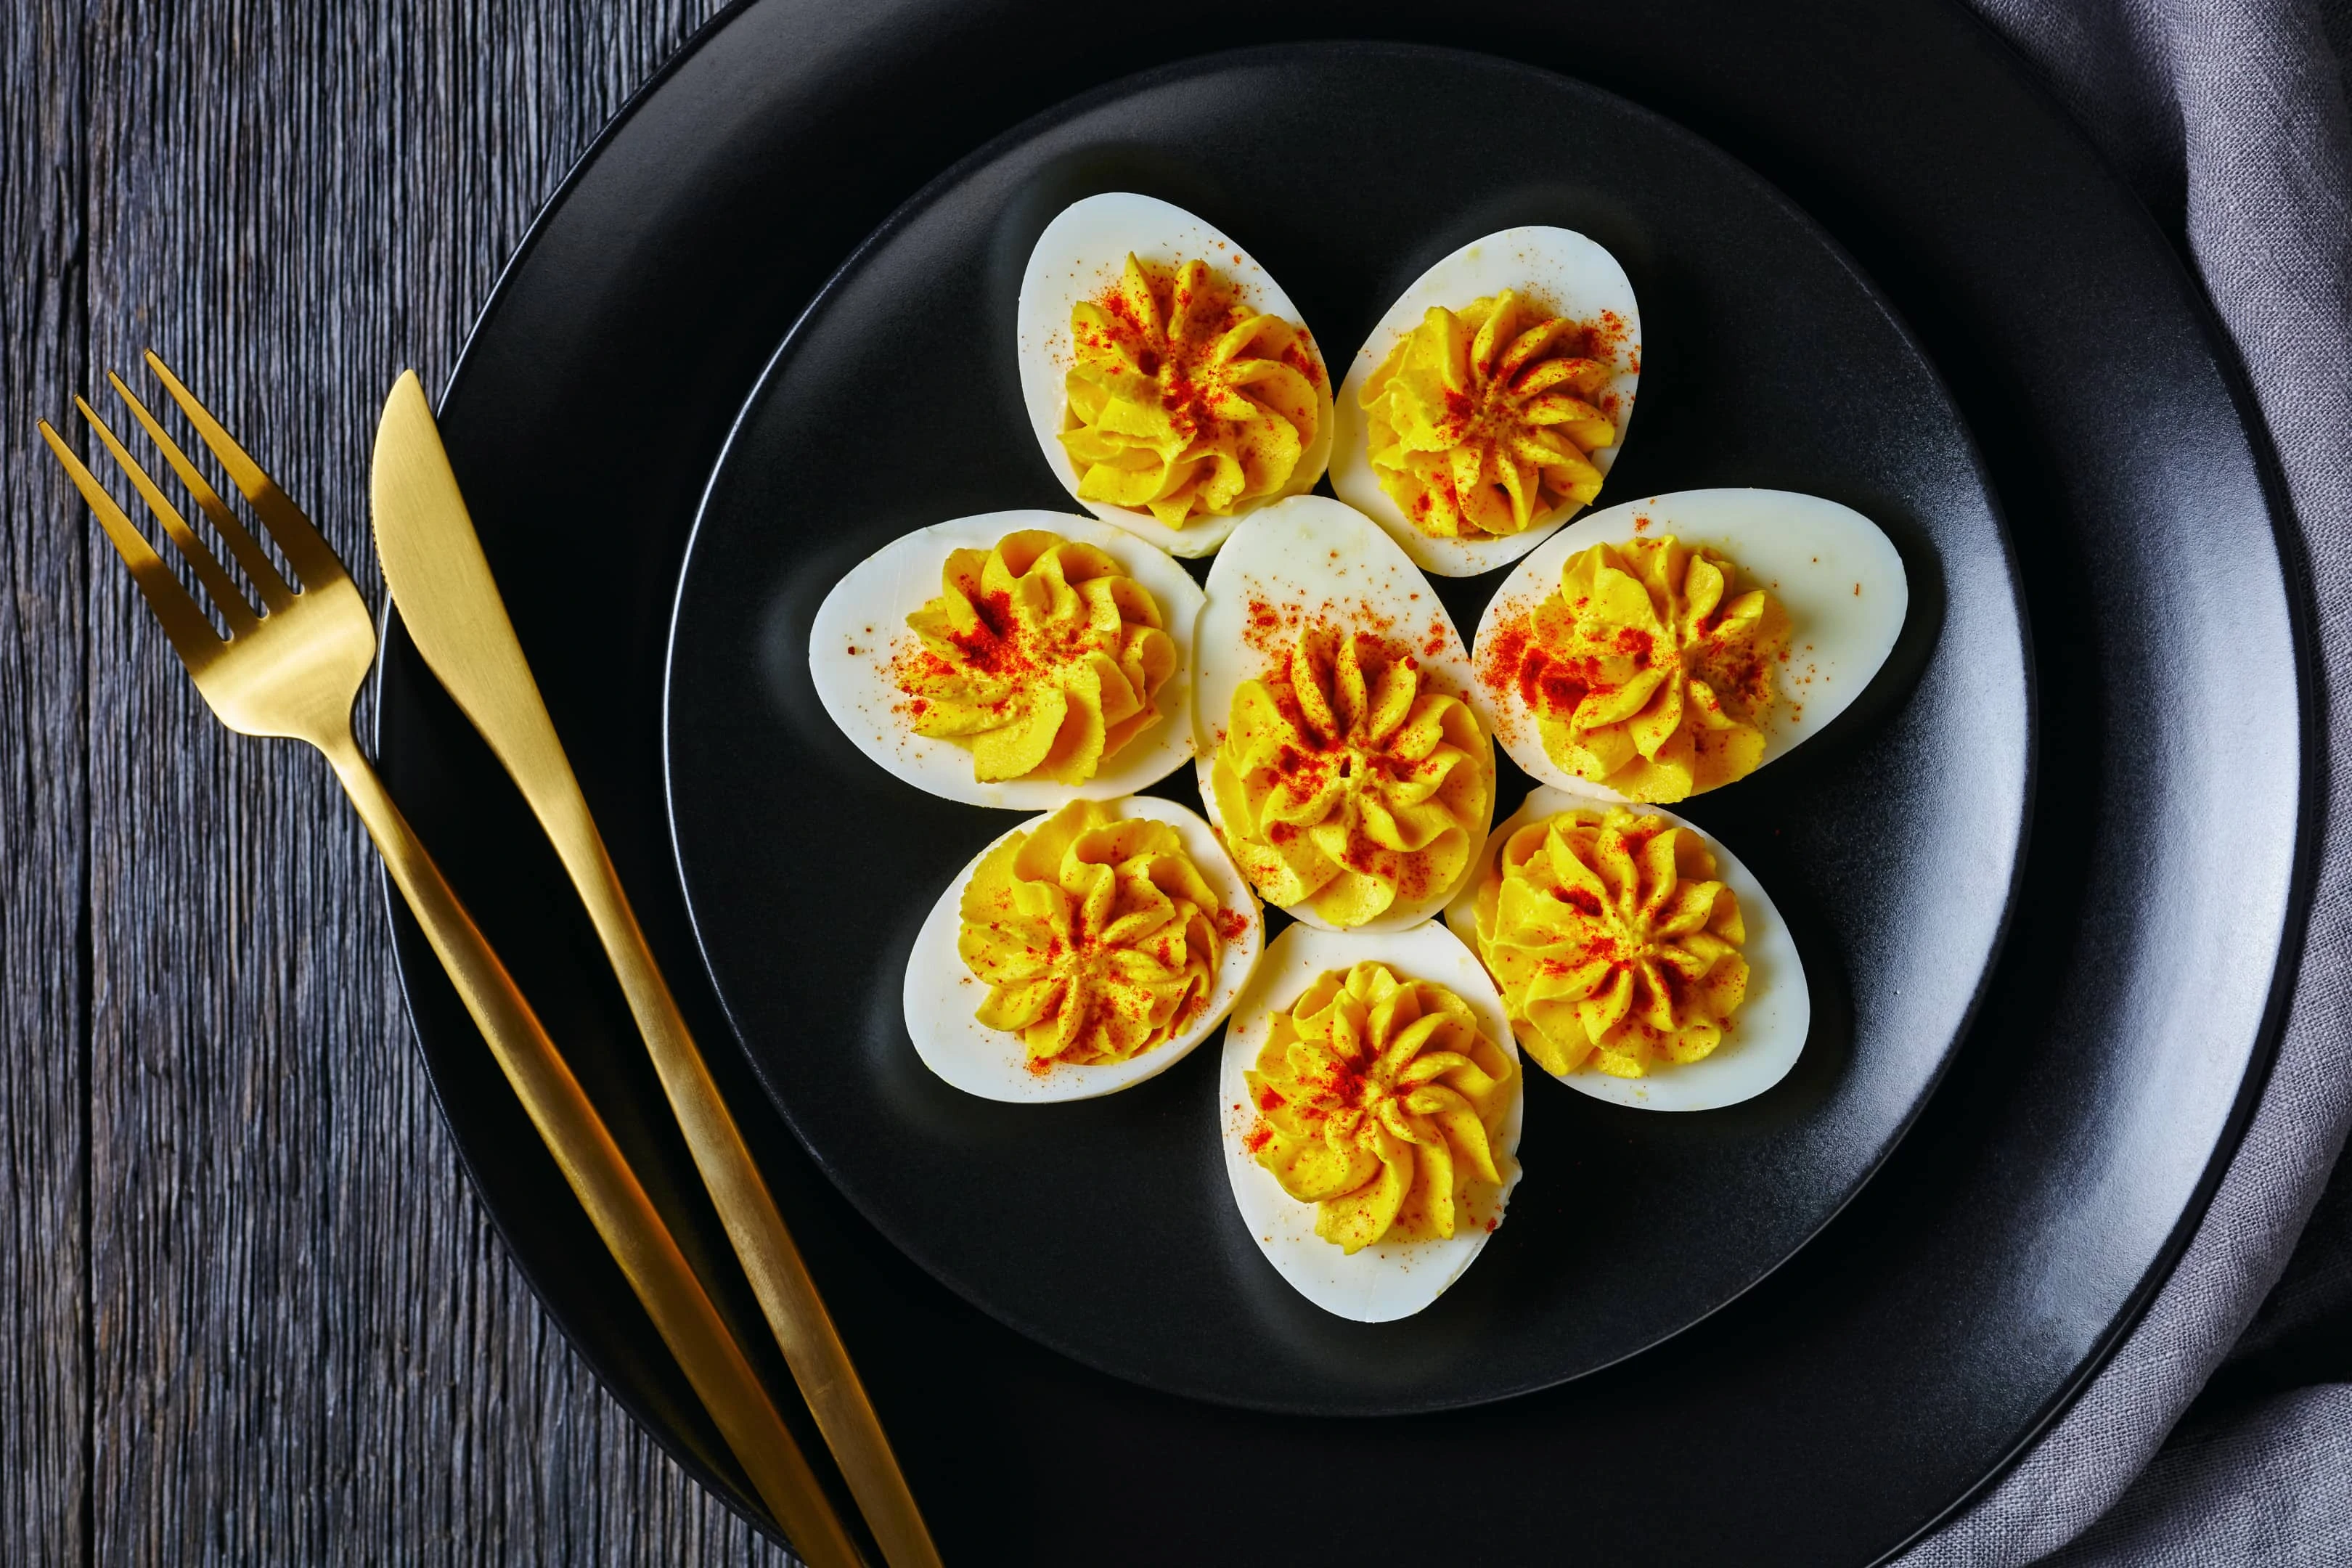 Classic deviled egg with relish, mustard and smoked paprika